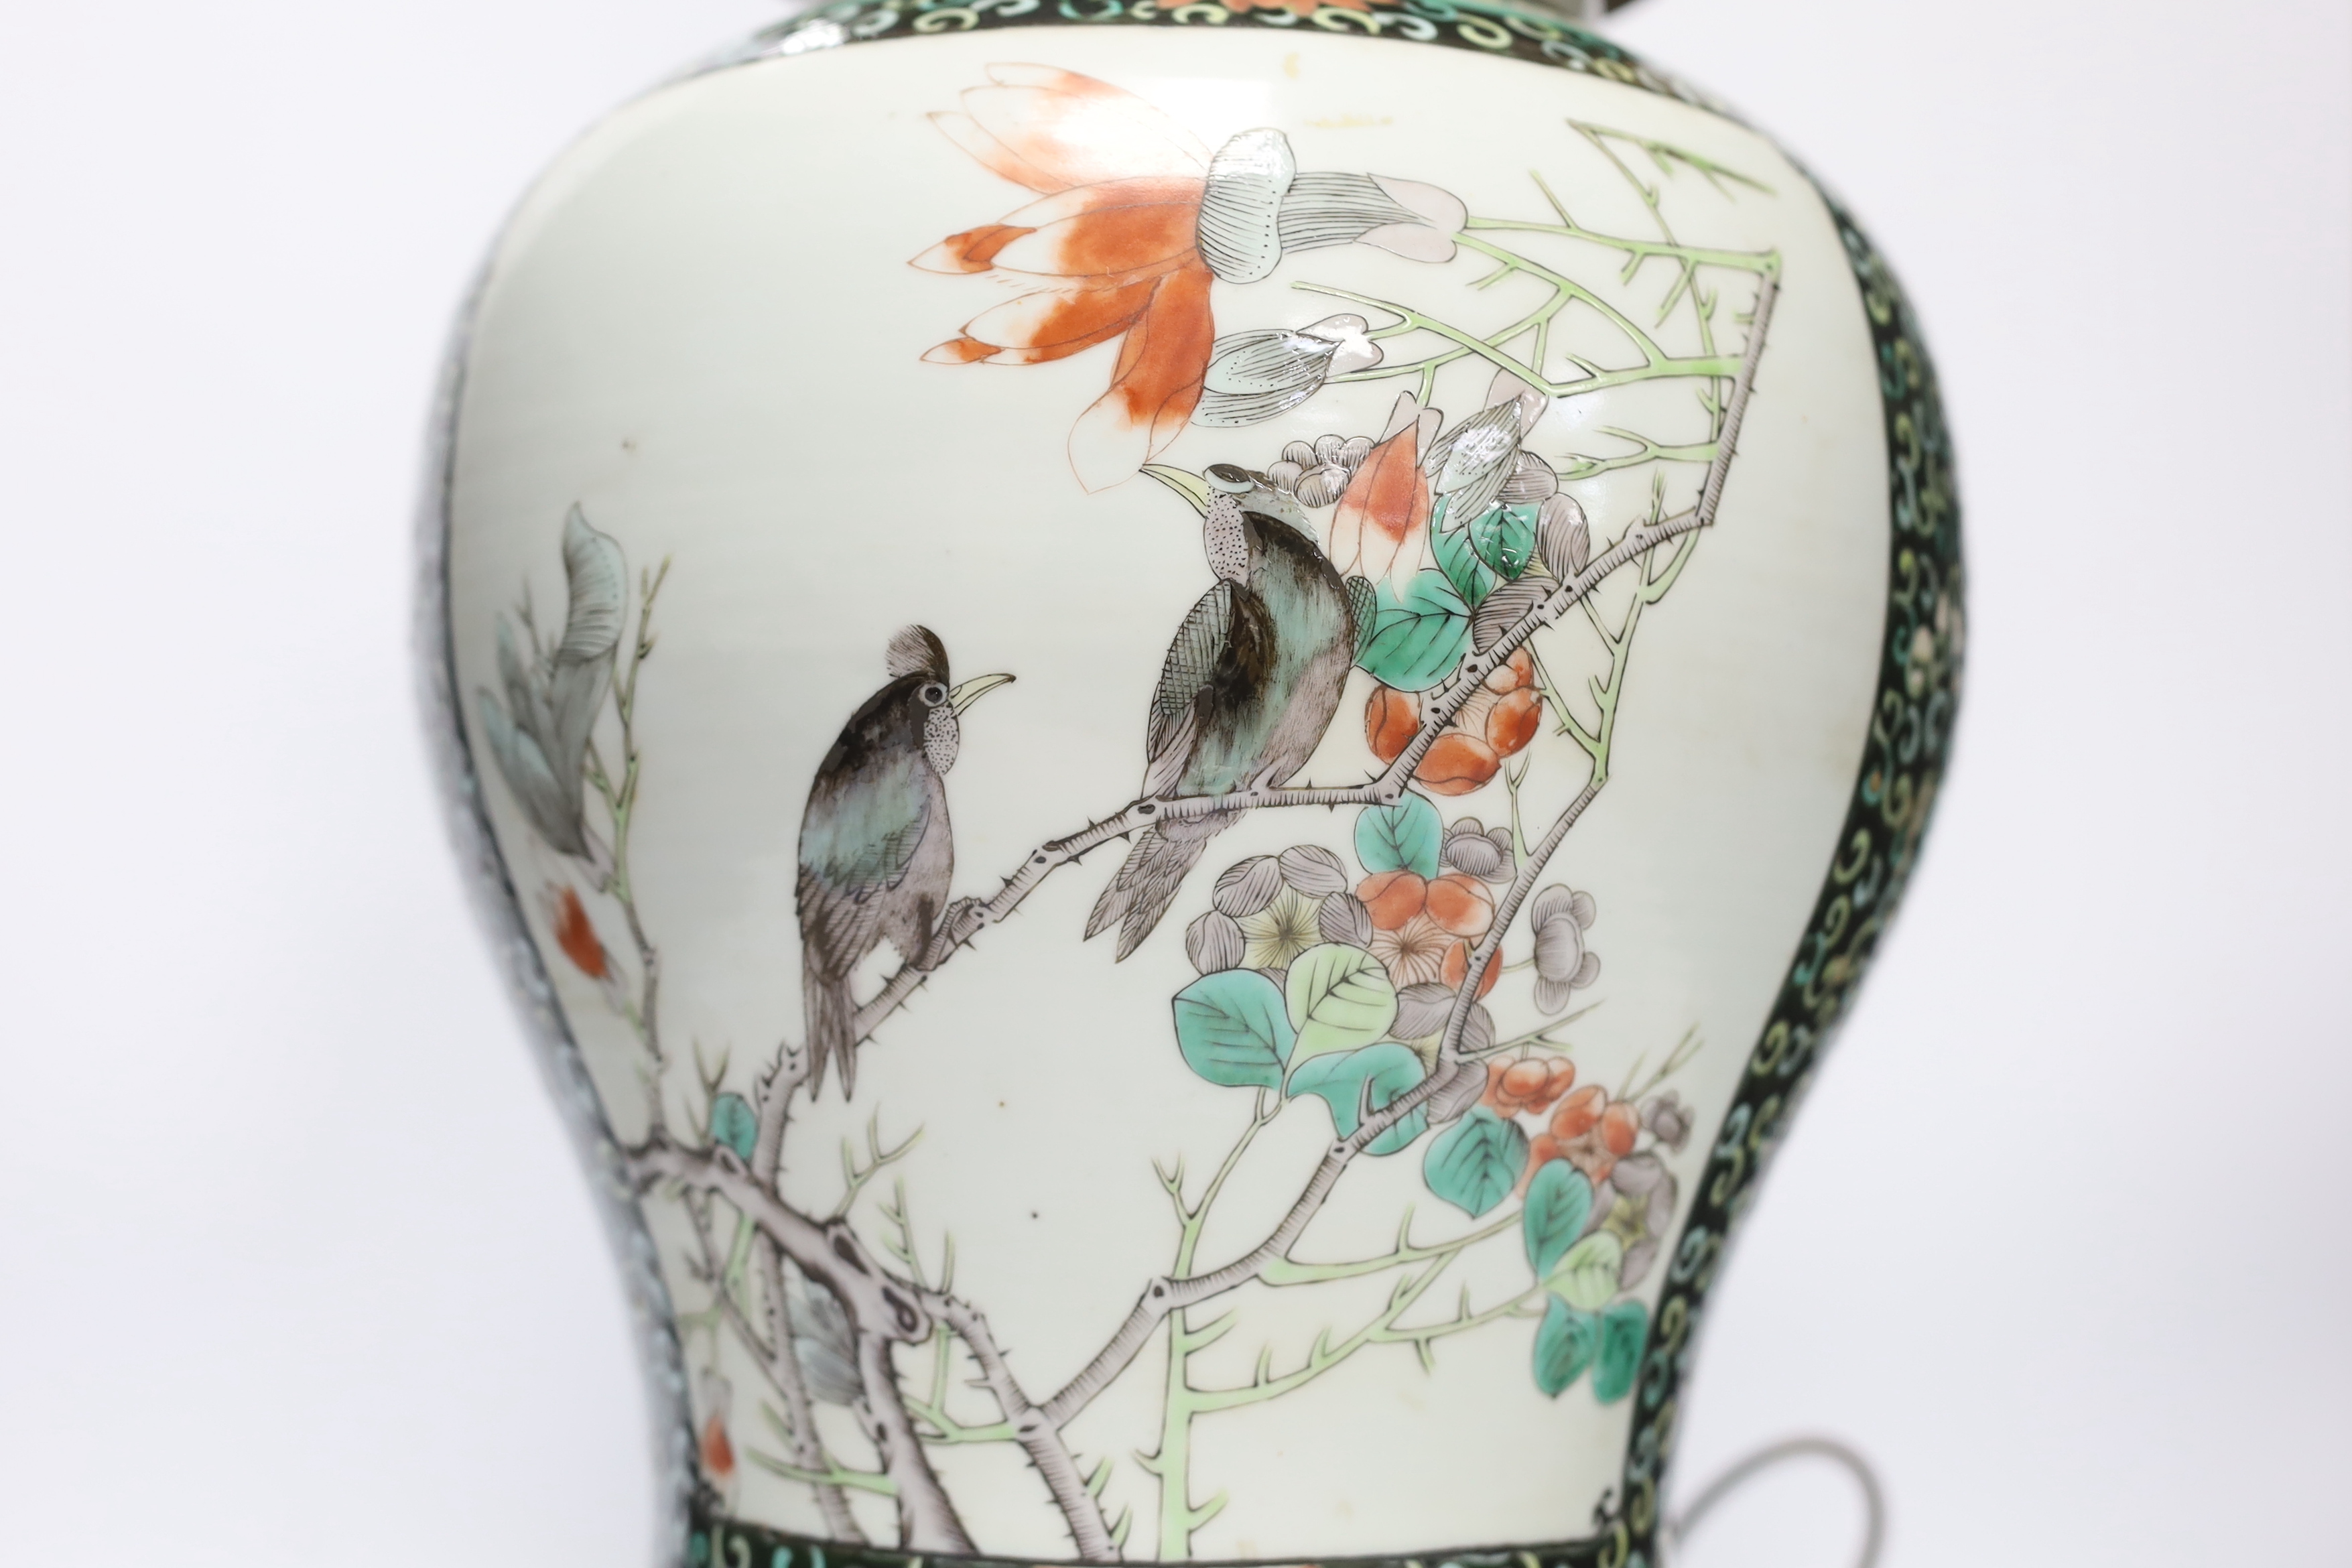 A Chinese famille verte porcelain baluster vase and cover, 19th century, decorated with birds amongst branches and blossom on decorative gilt metal base (now converted to a table lamp and drilled), 56cm total